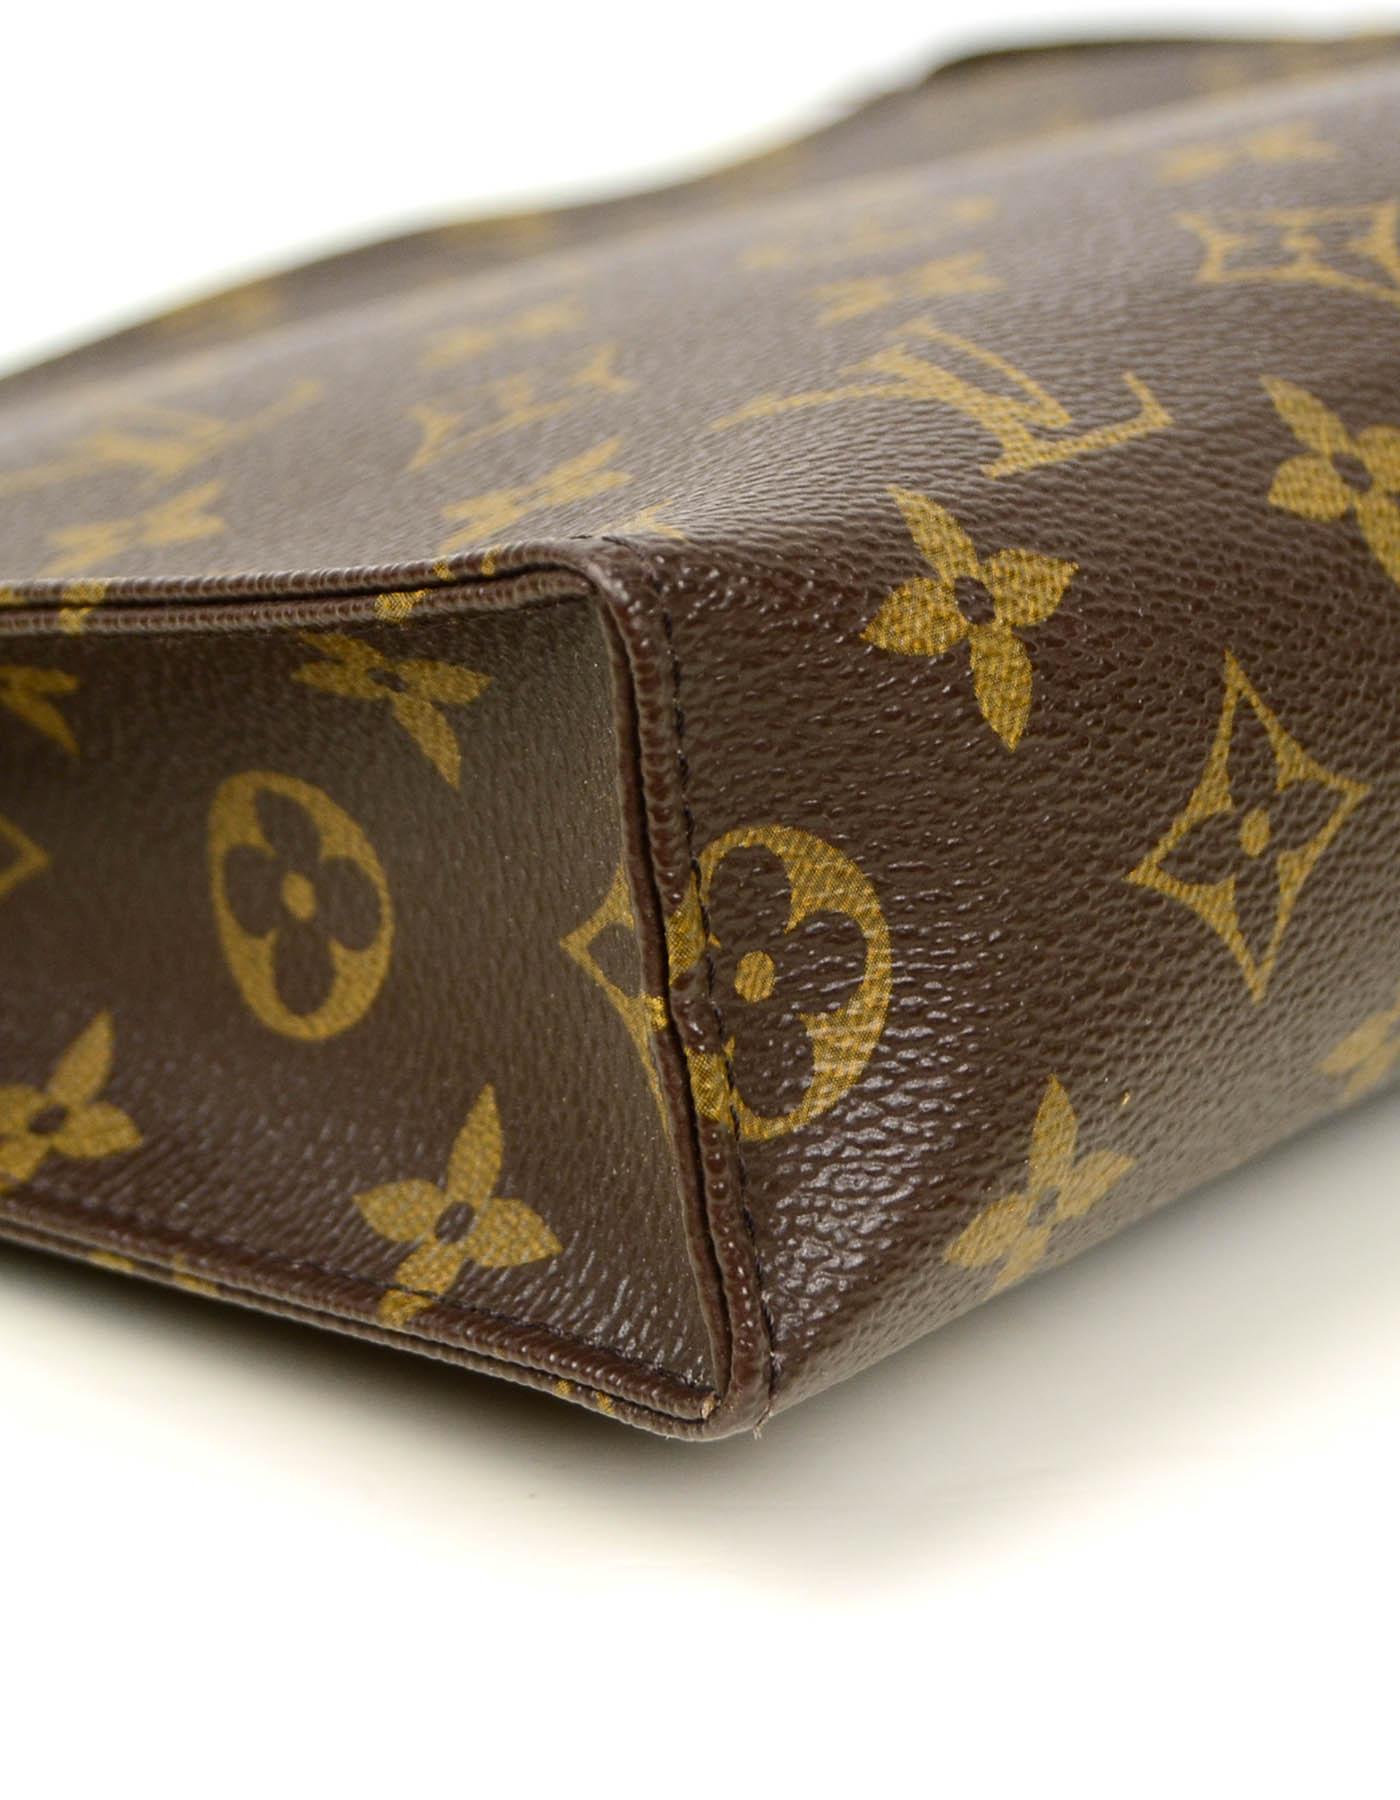 Women's or Men's Louis Vuitton SOLD OUT Monogram Coated Canvas Toiletry 26 Pouch/Clutch Bag